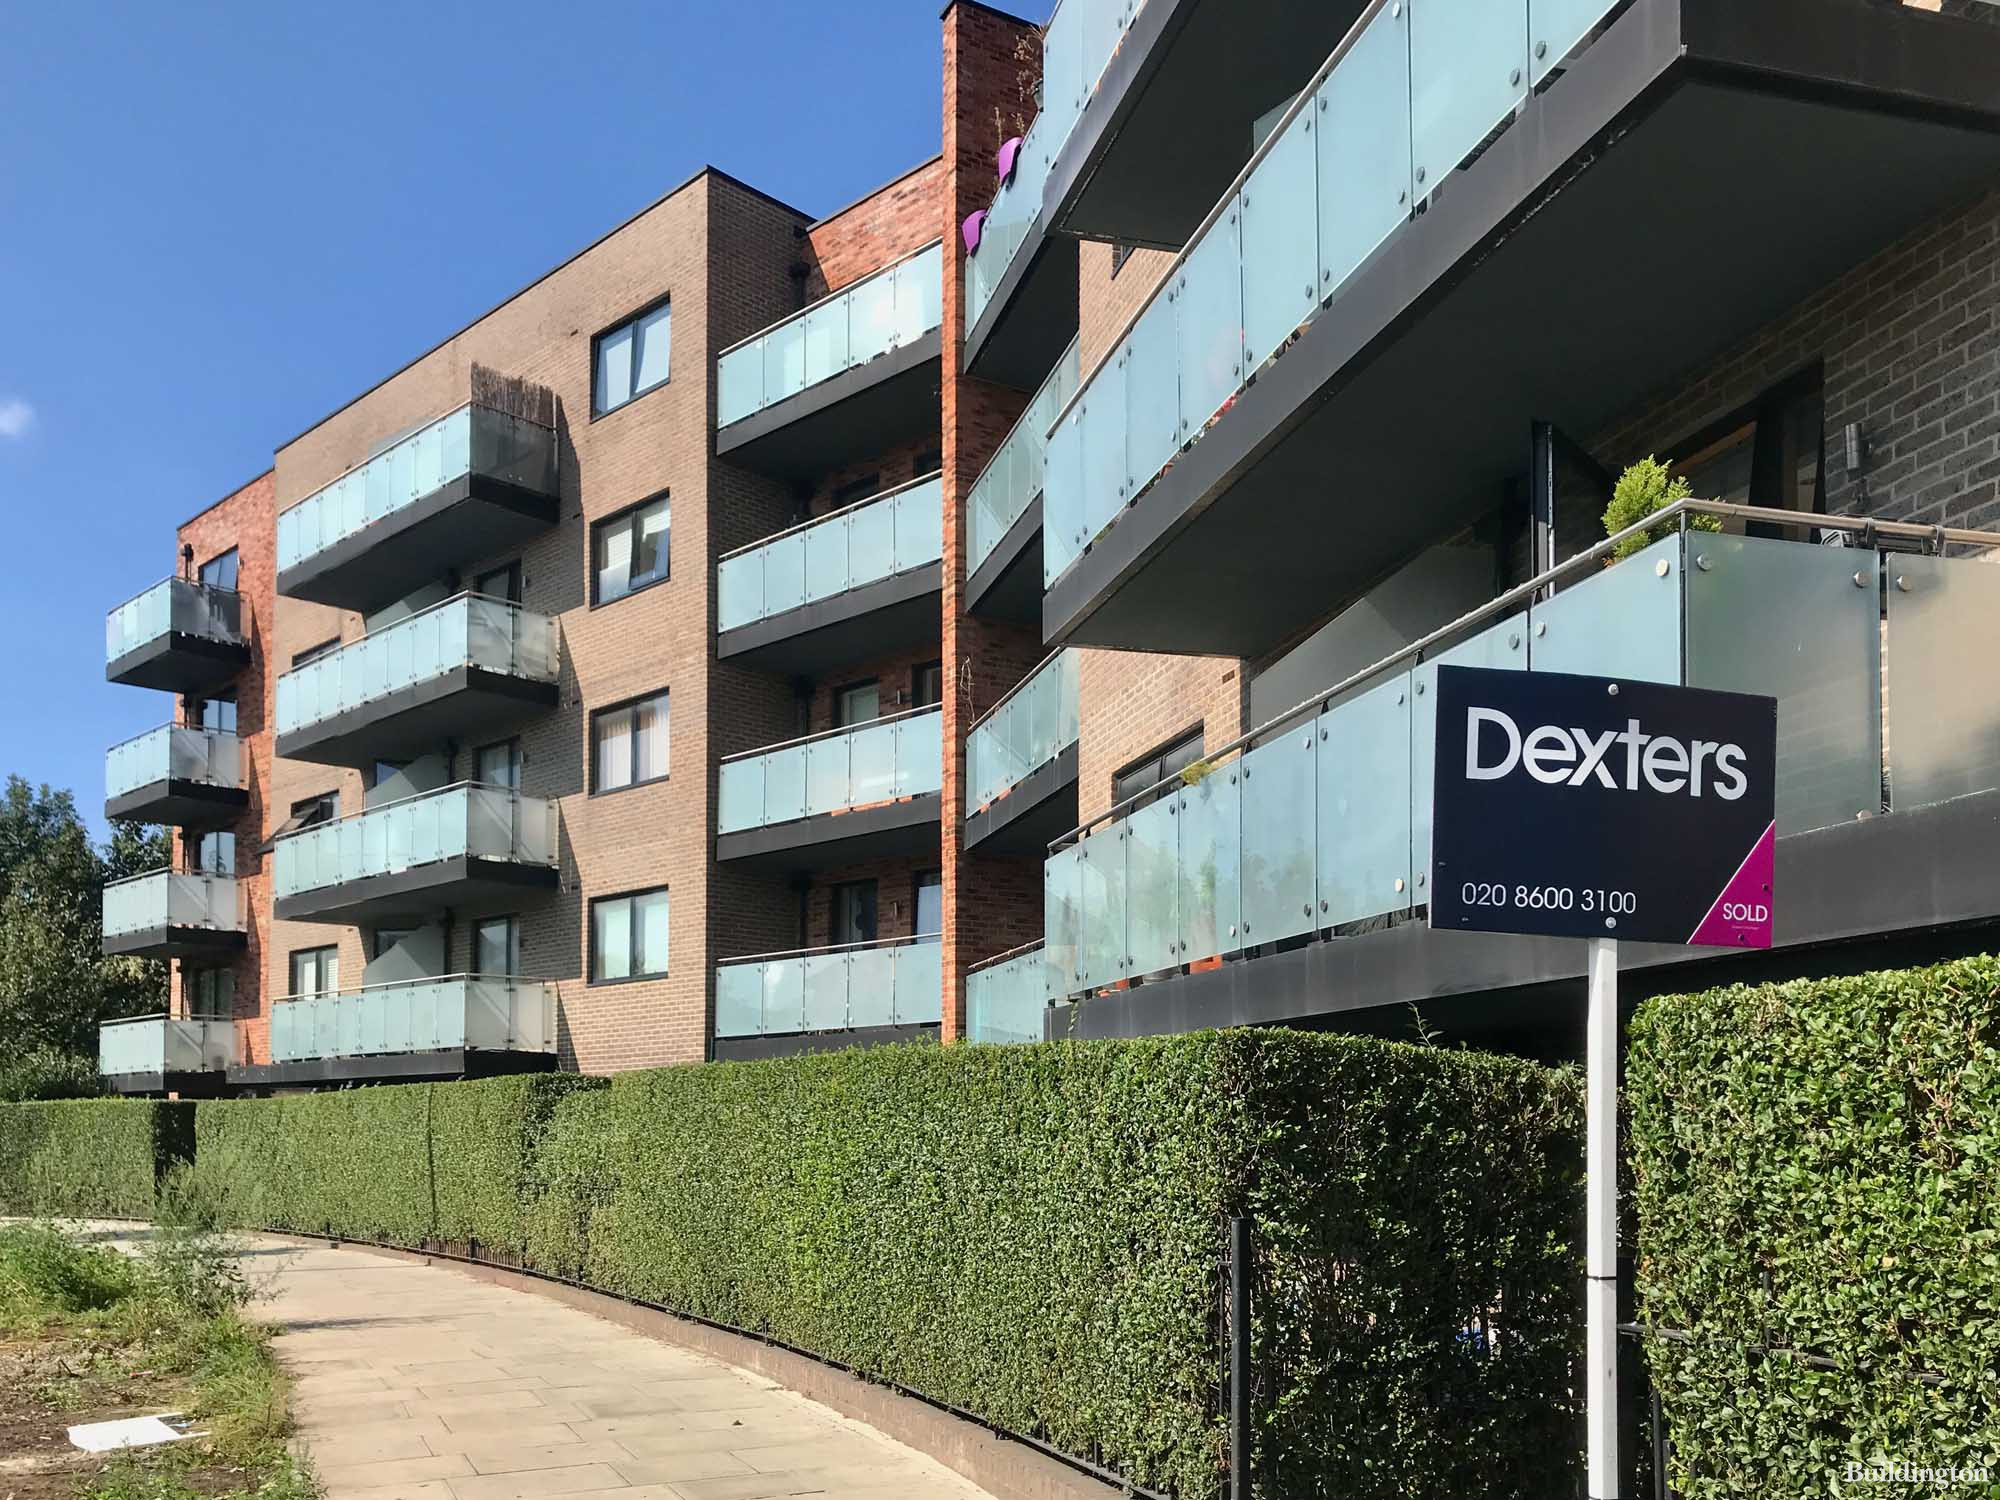 Dexters estate agent board at Craven Park in Harlesden, London NW10.